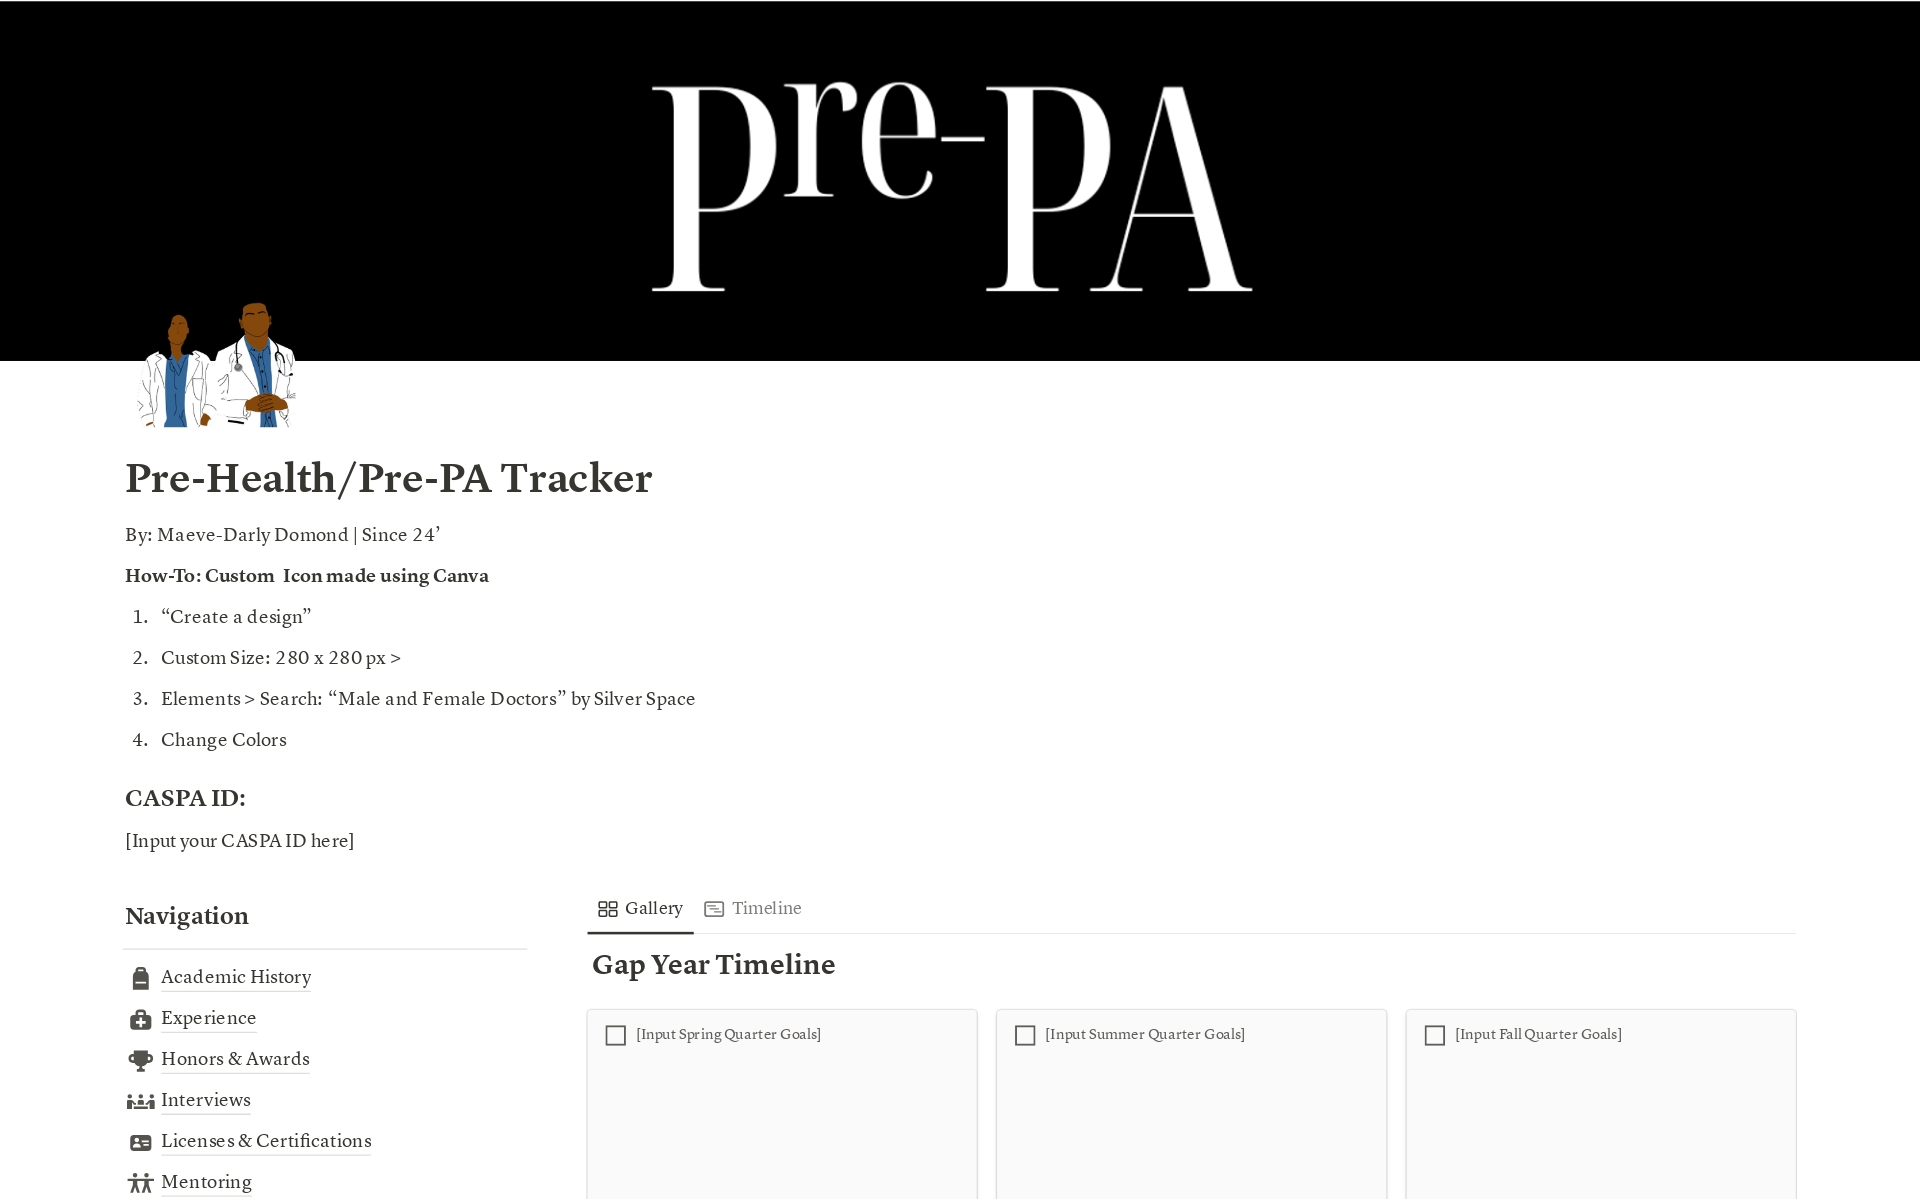 A Pre-PA notion tracker designed to assist aspiring physician assistants in organizing and monitoring their progress toward their career goals.